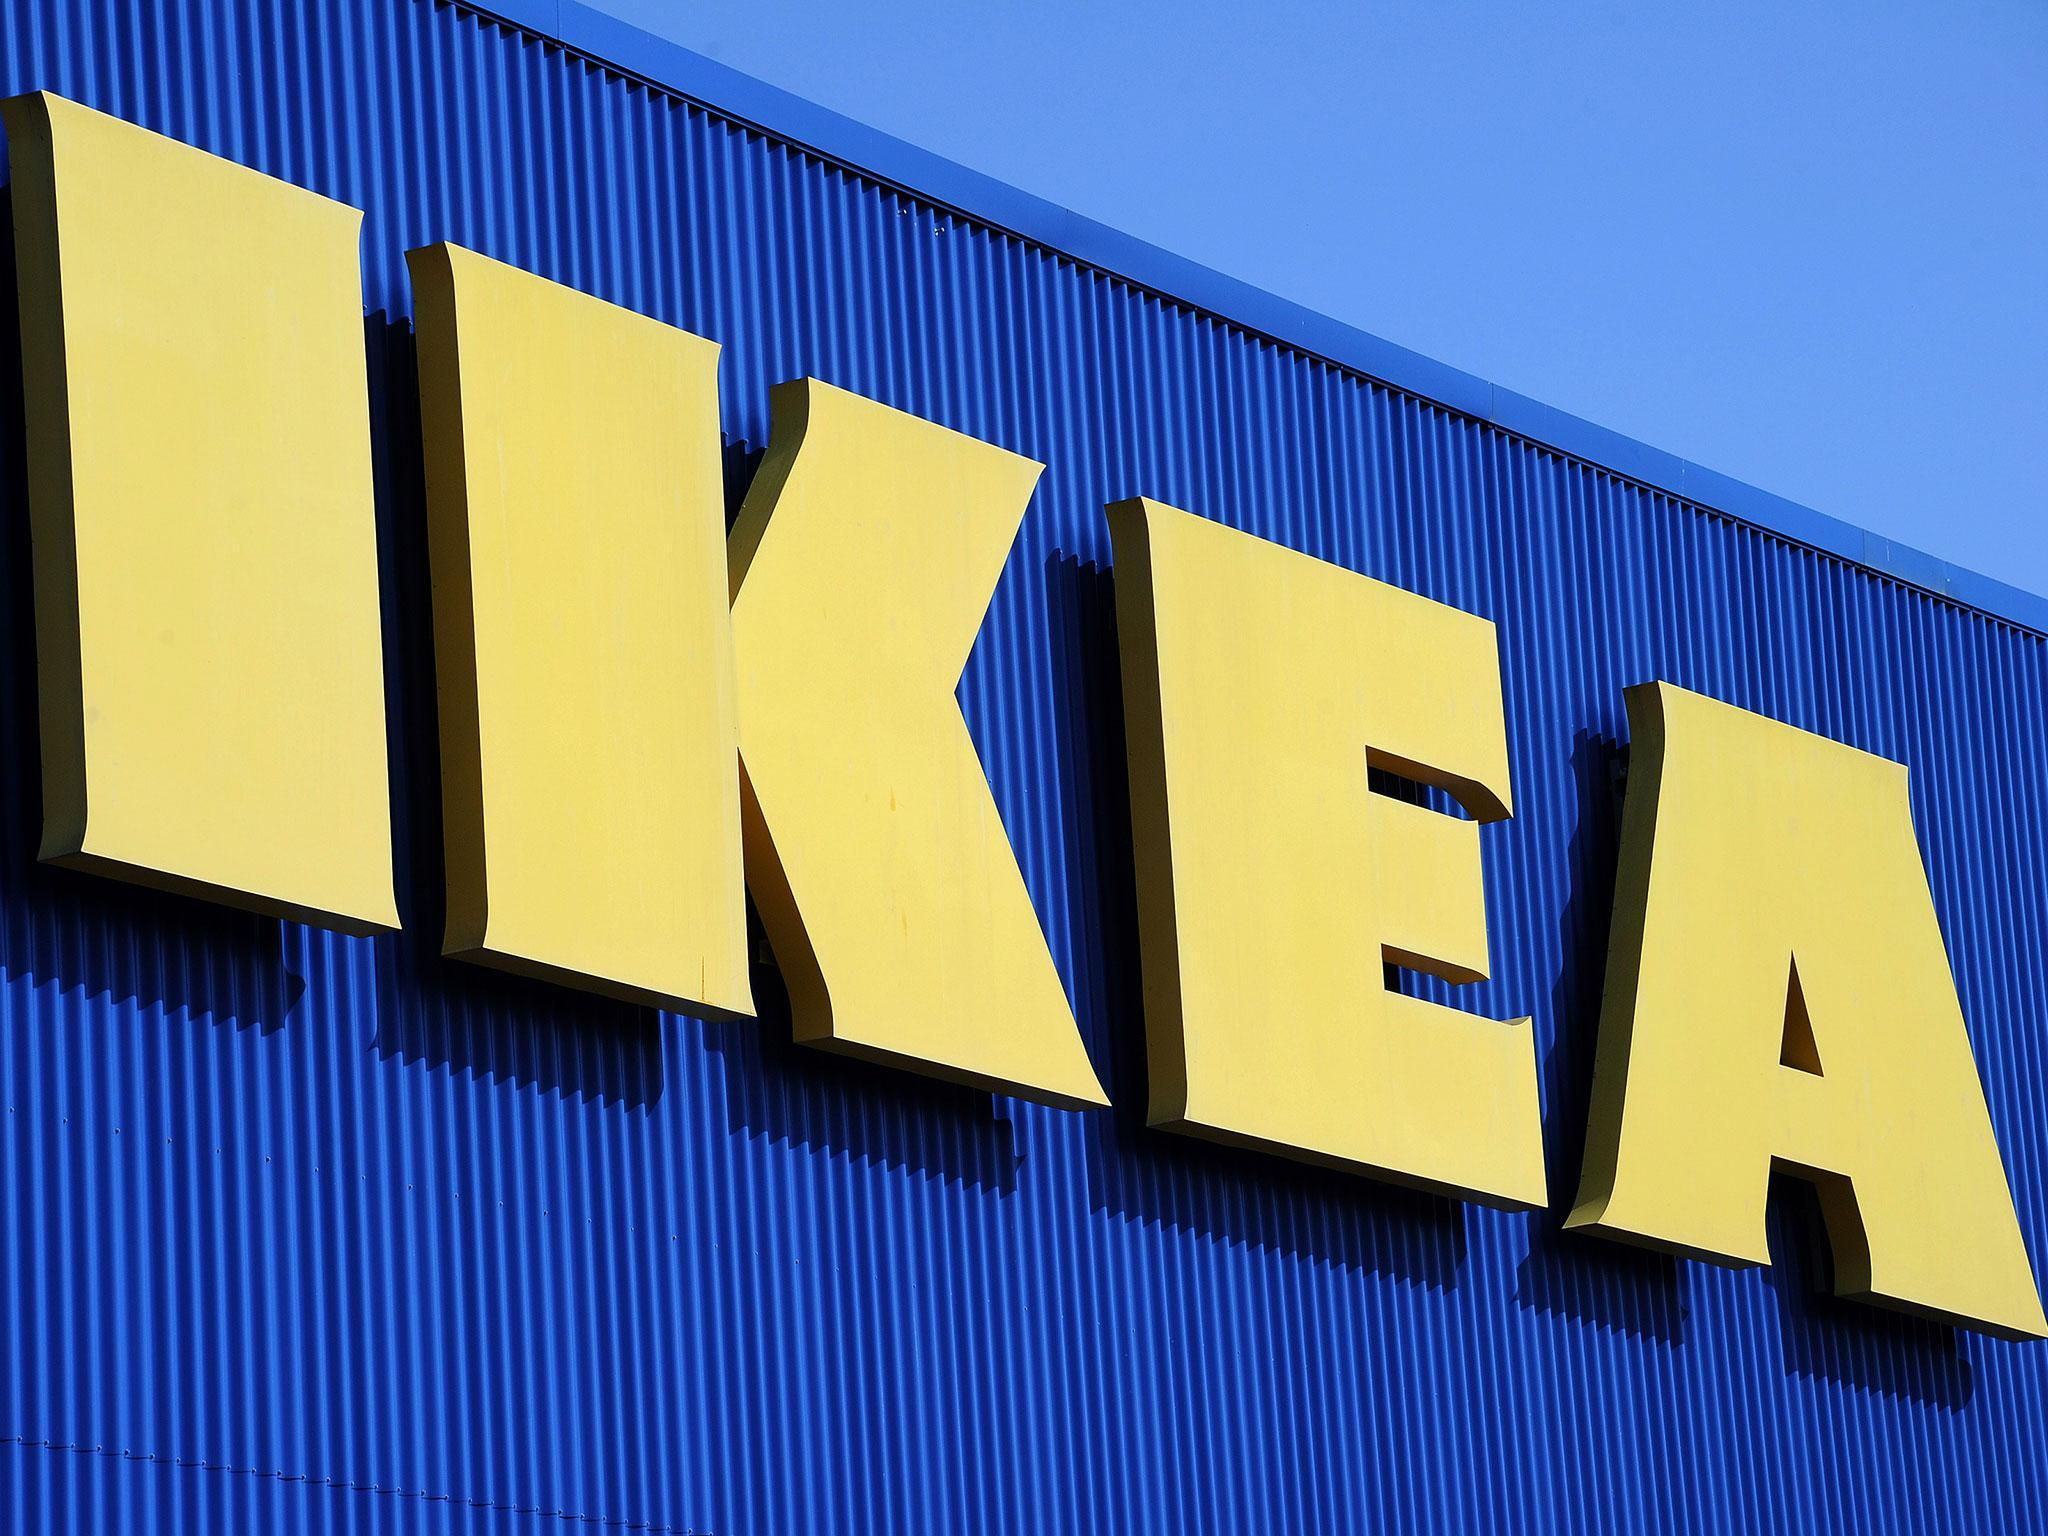 Ikea agrees to pay £40m to the families of three toddlers crushed to